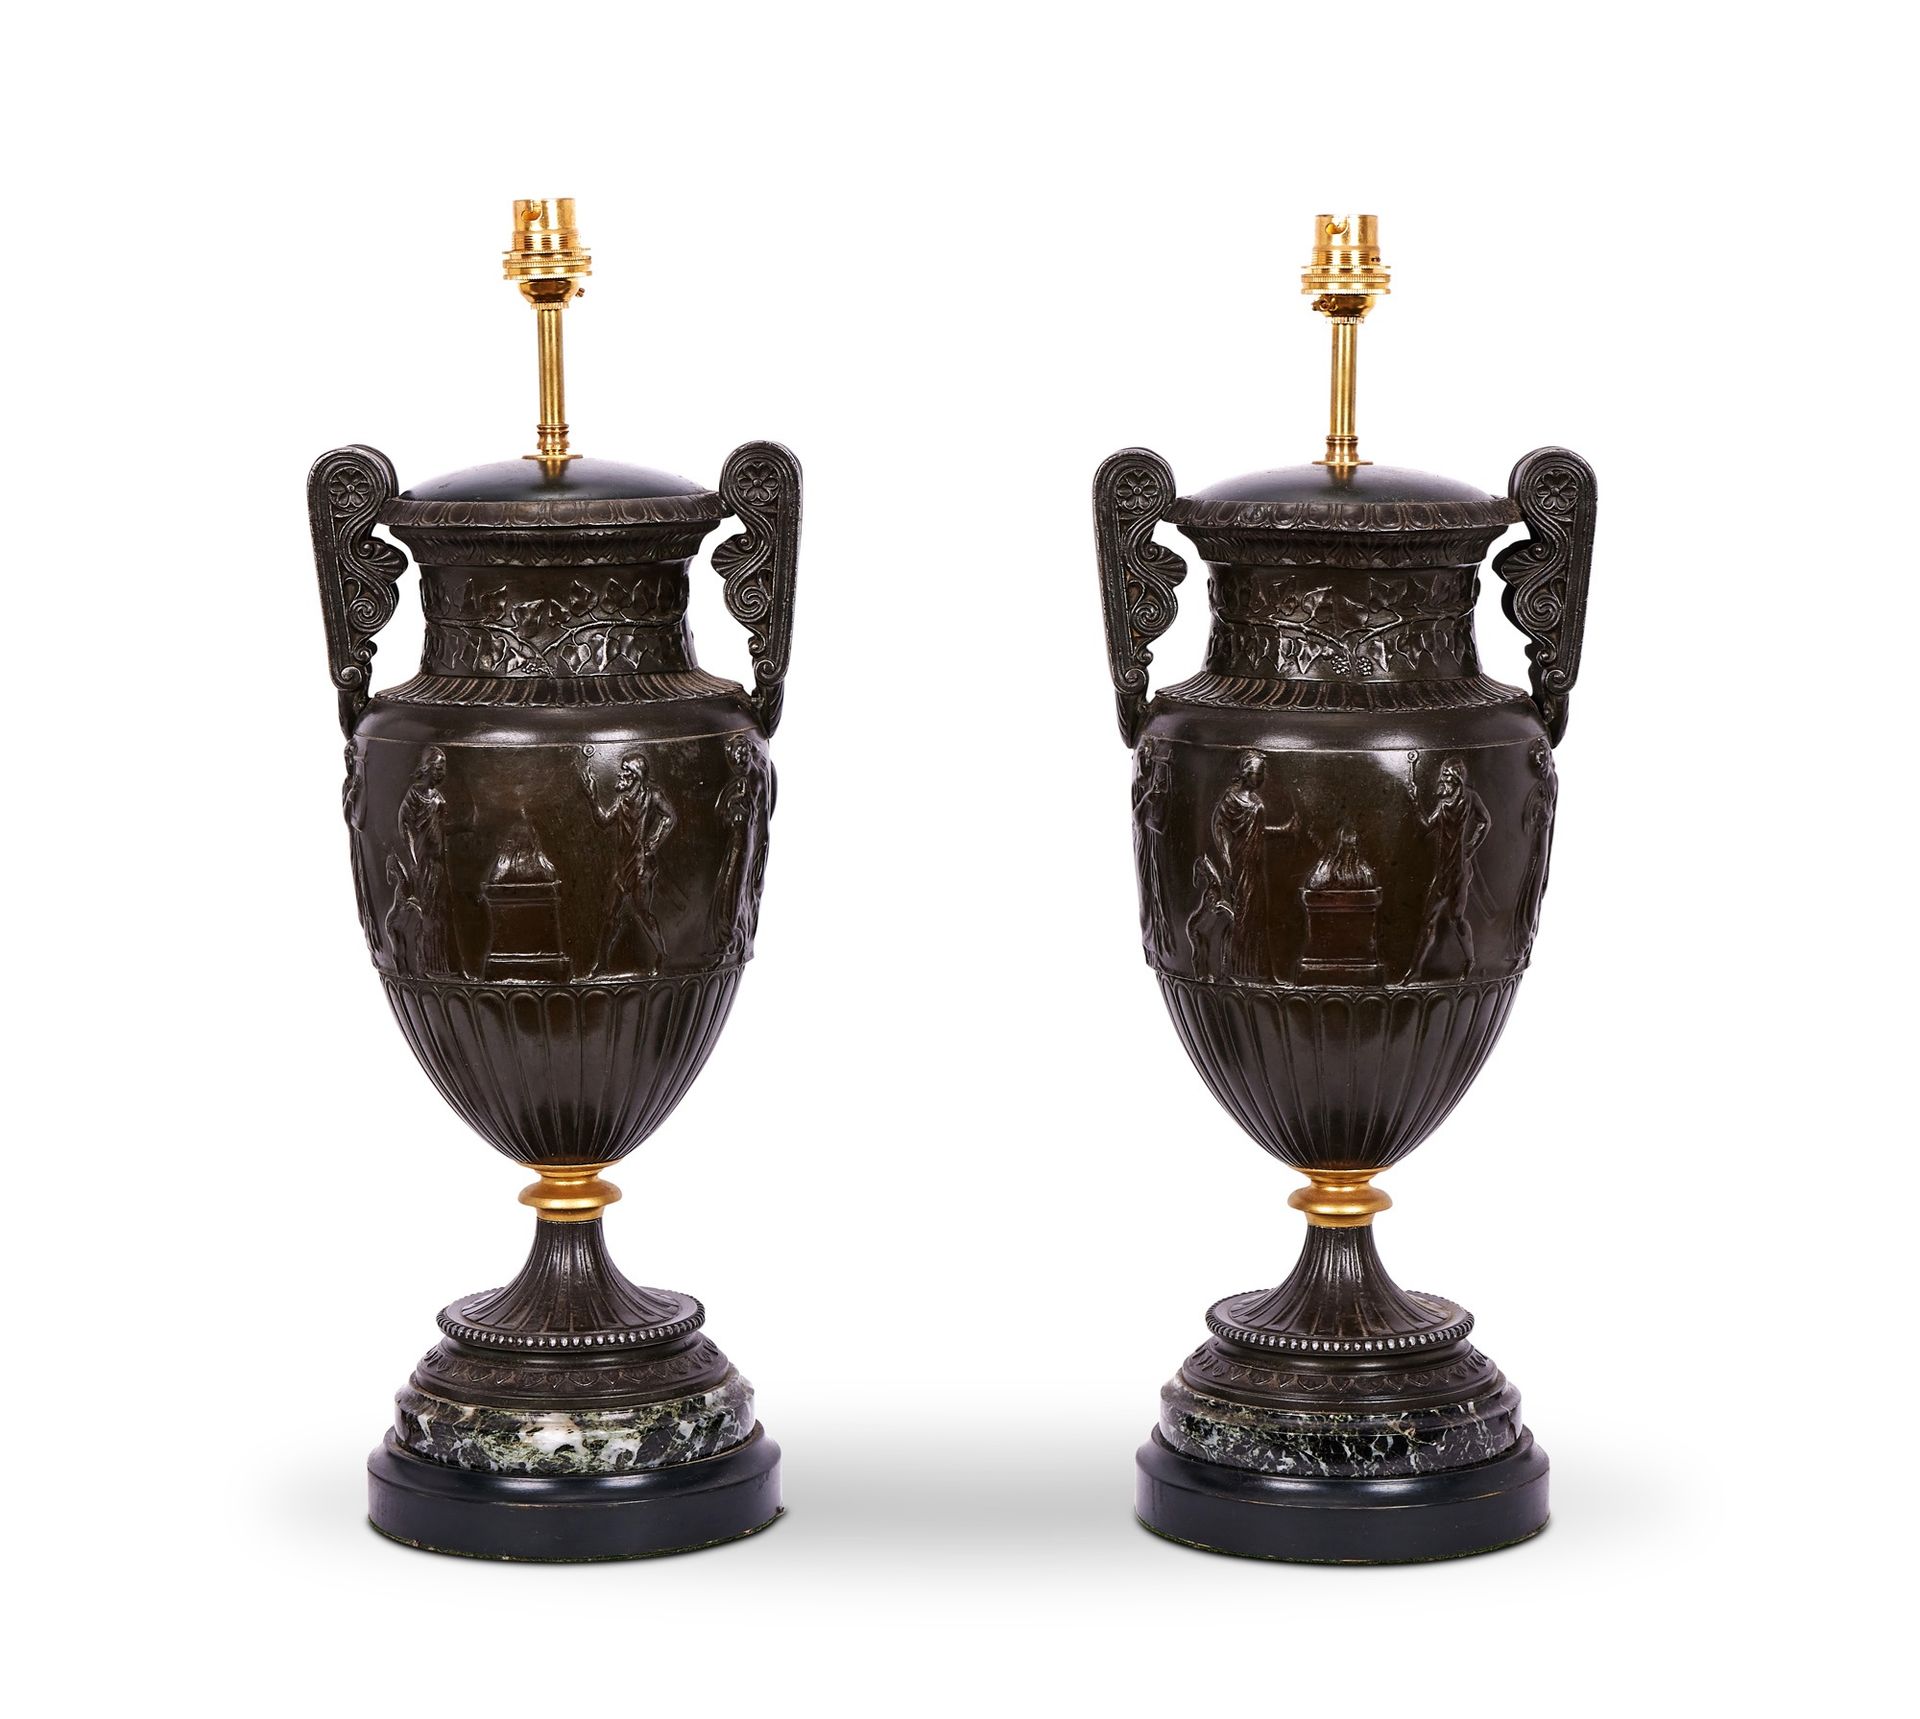 A PAIR OF 19TH CENTURY CLASSICAL STYLE LAMP BASES A PAIR OF 19TH CENTURY CLASSIC&hellip;